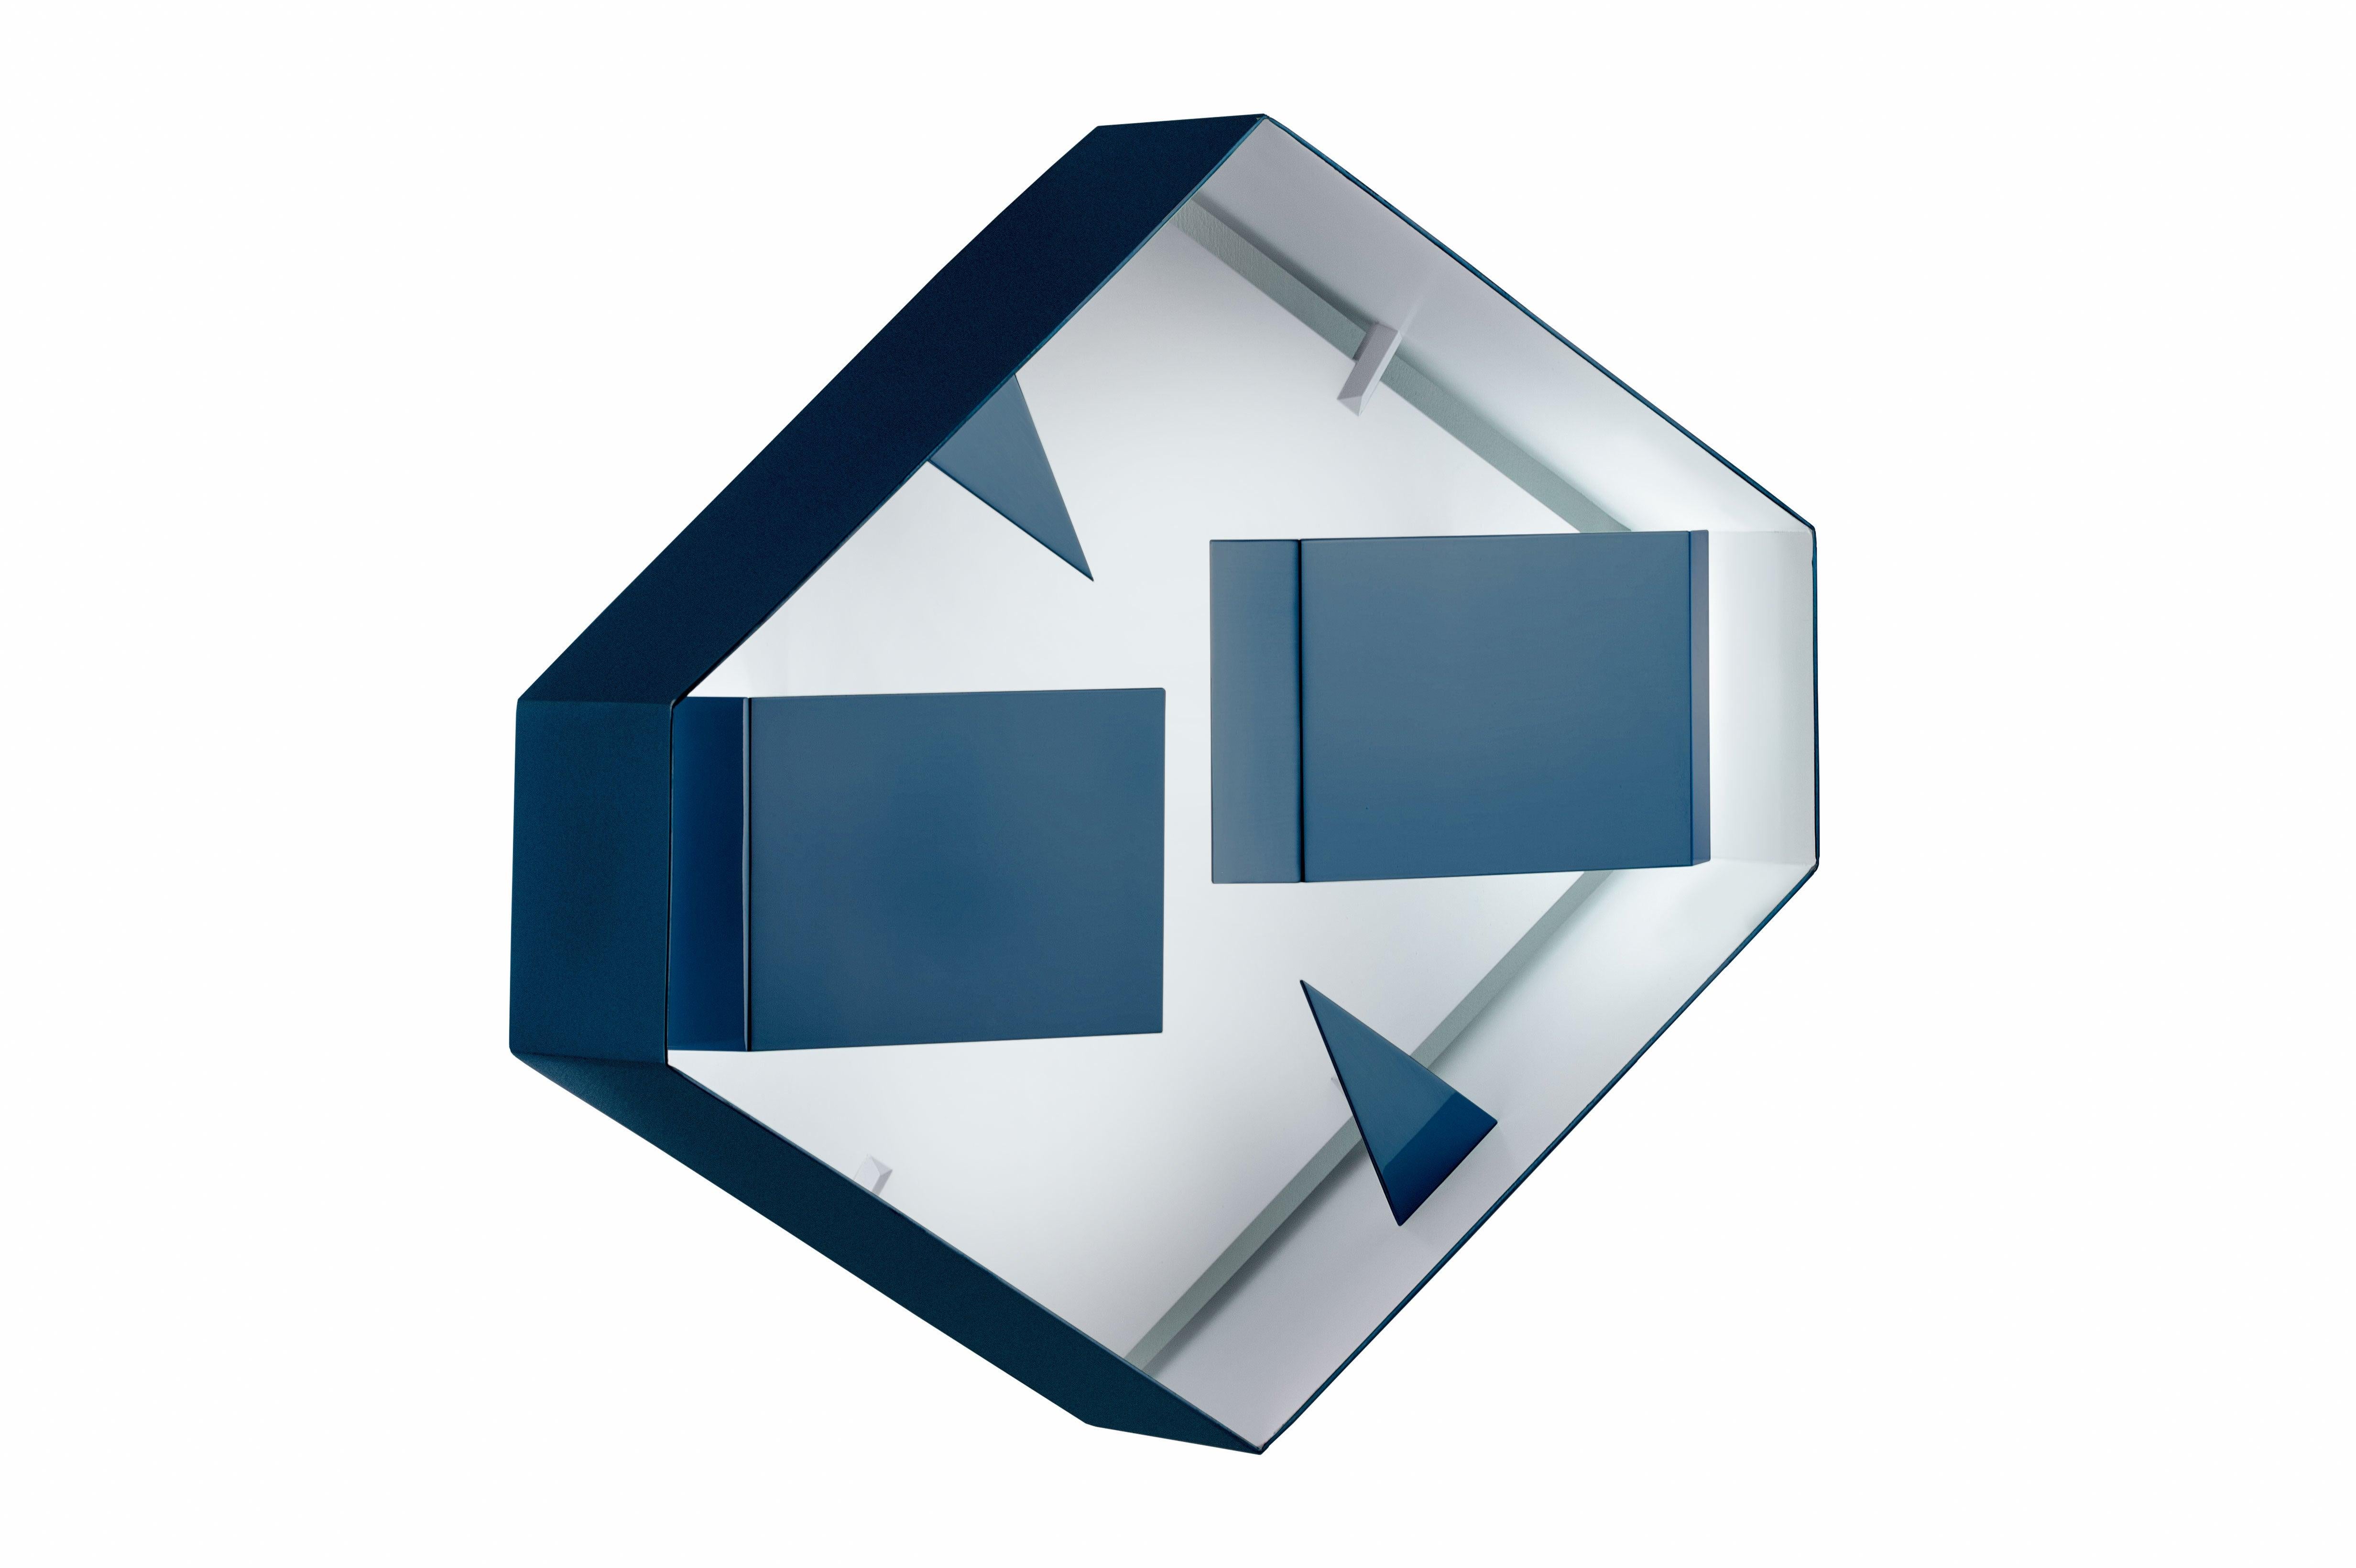 Wall sconce hexagonal 'Screen of Light' design Gio Ponti Italy Limited Edition, varnished blue inside white Wall sculpture light, blue painted, a lamp of timeless, iconic design. Handcrafted product, realized by Pollice Illuminazione Milan from the